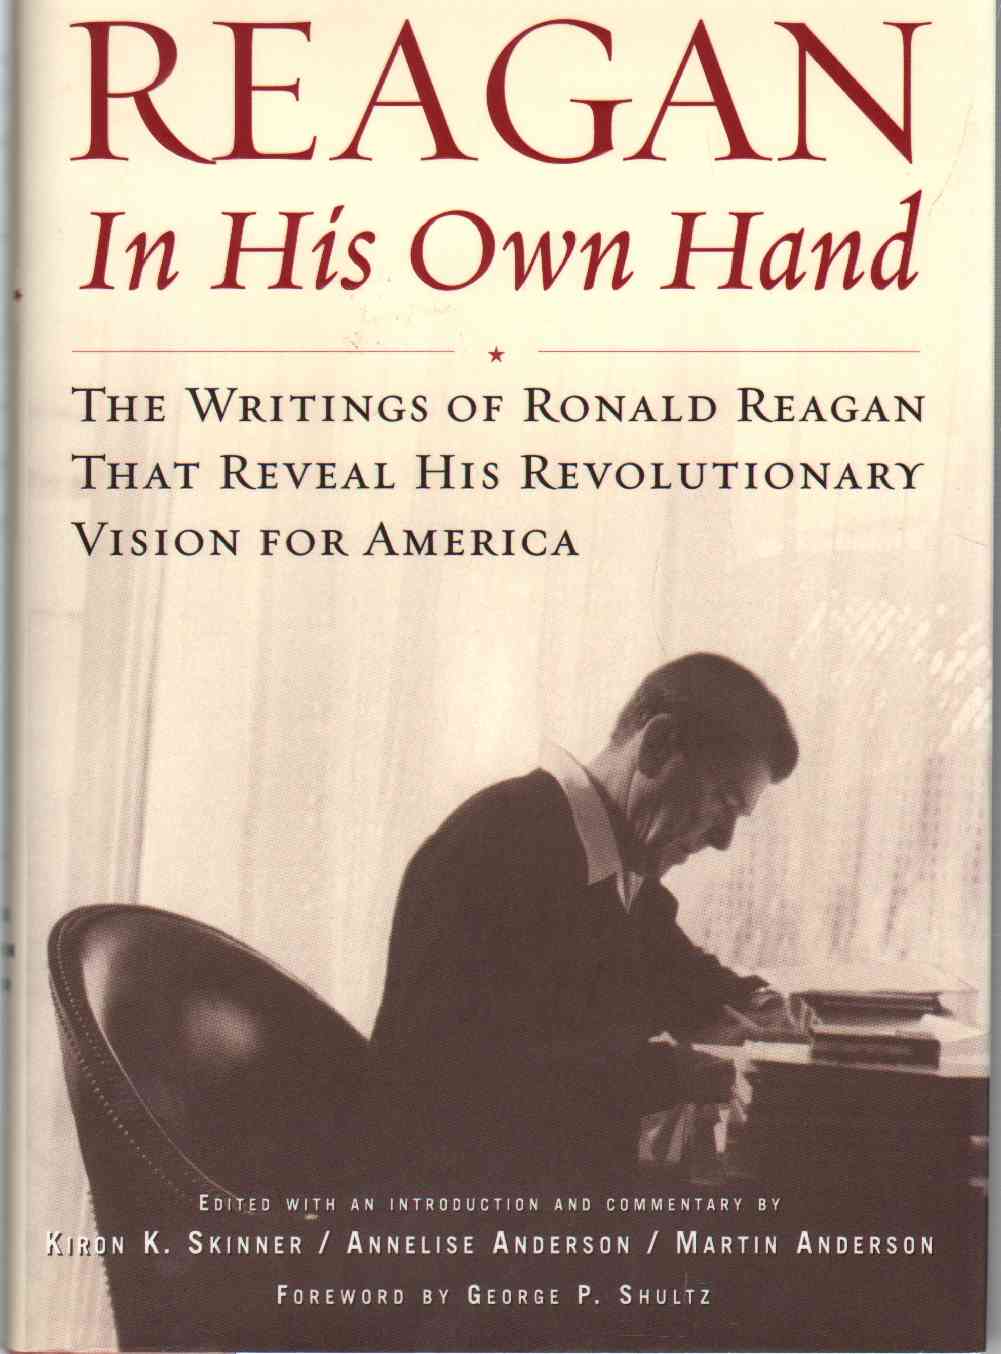 Skinner, Kiron K. & Annelise Anderson & Martin Anderson - REAGAN, IN HIS OWN HAND Inscribed and Signed by all Editors The Writings of Ronald Reagan That Reveal His Revolutionary Vision for America